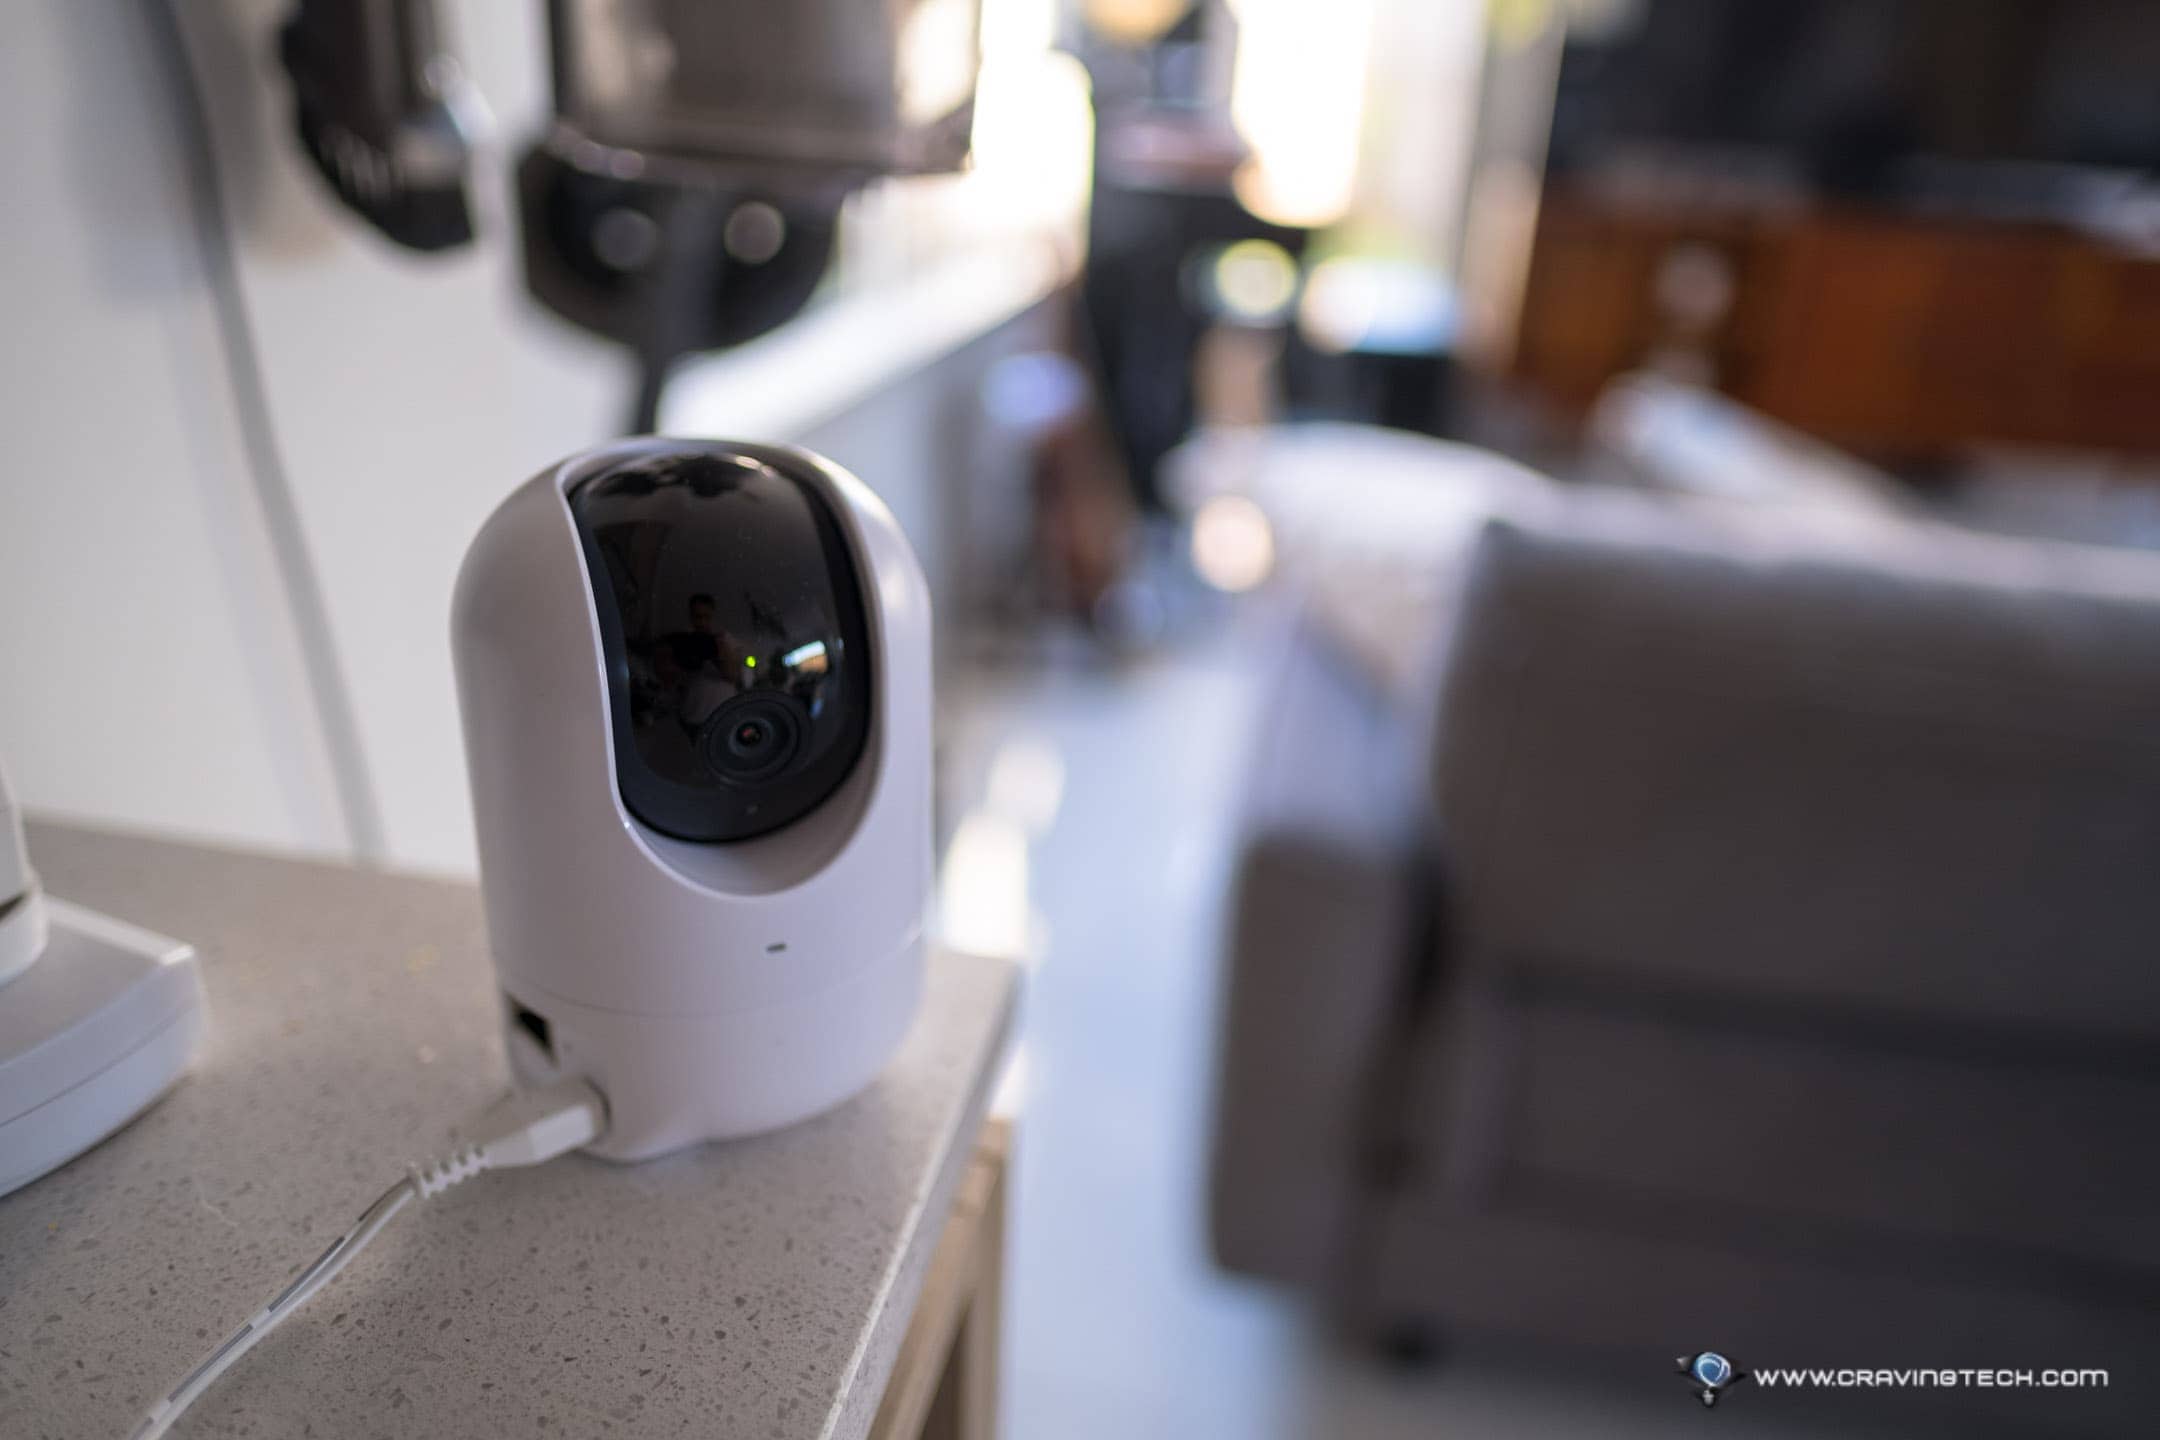 This indoor security camera can track and follow you around